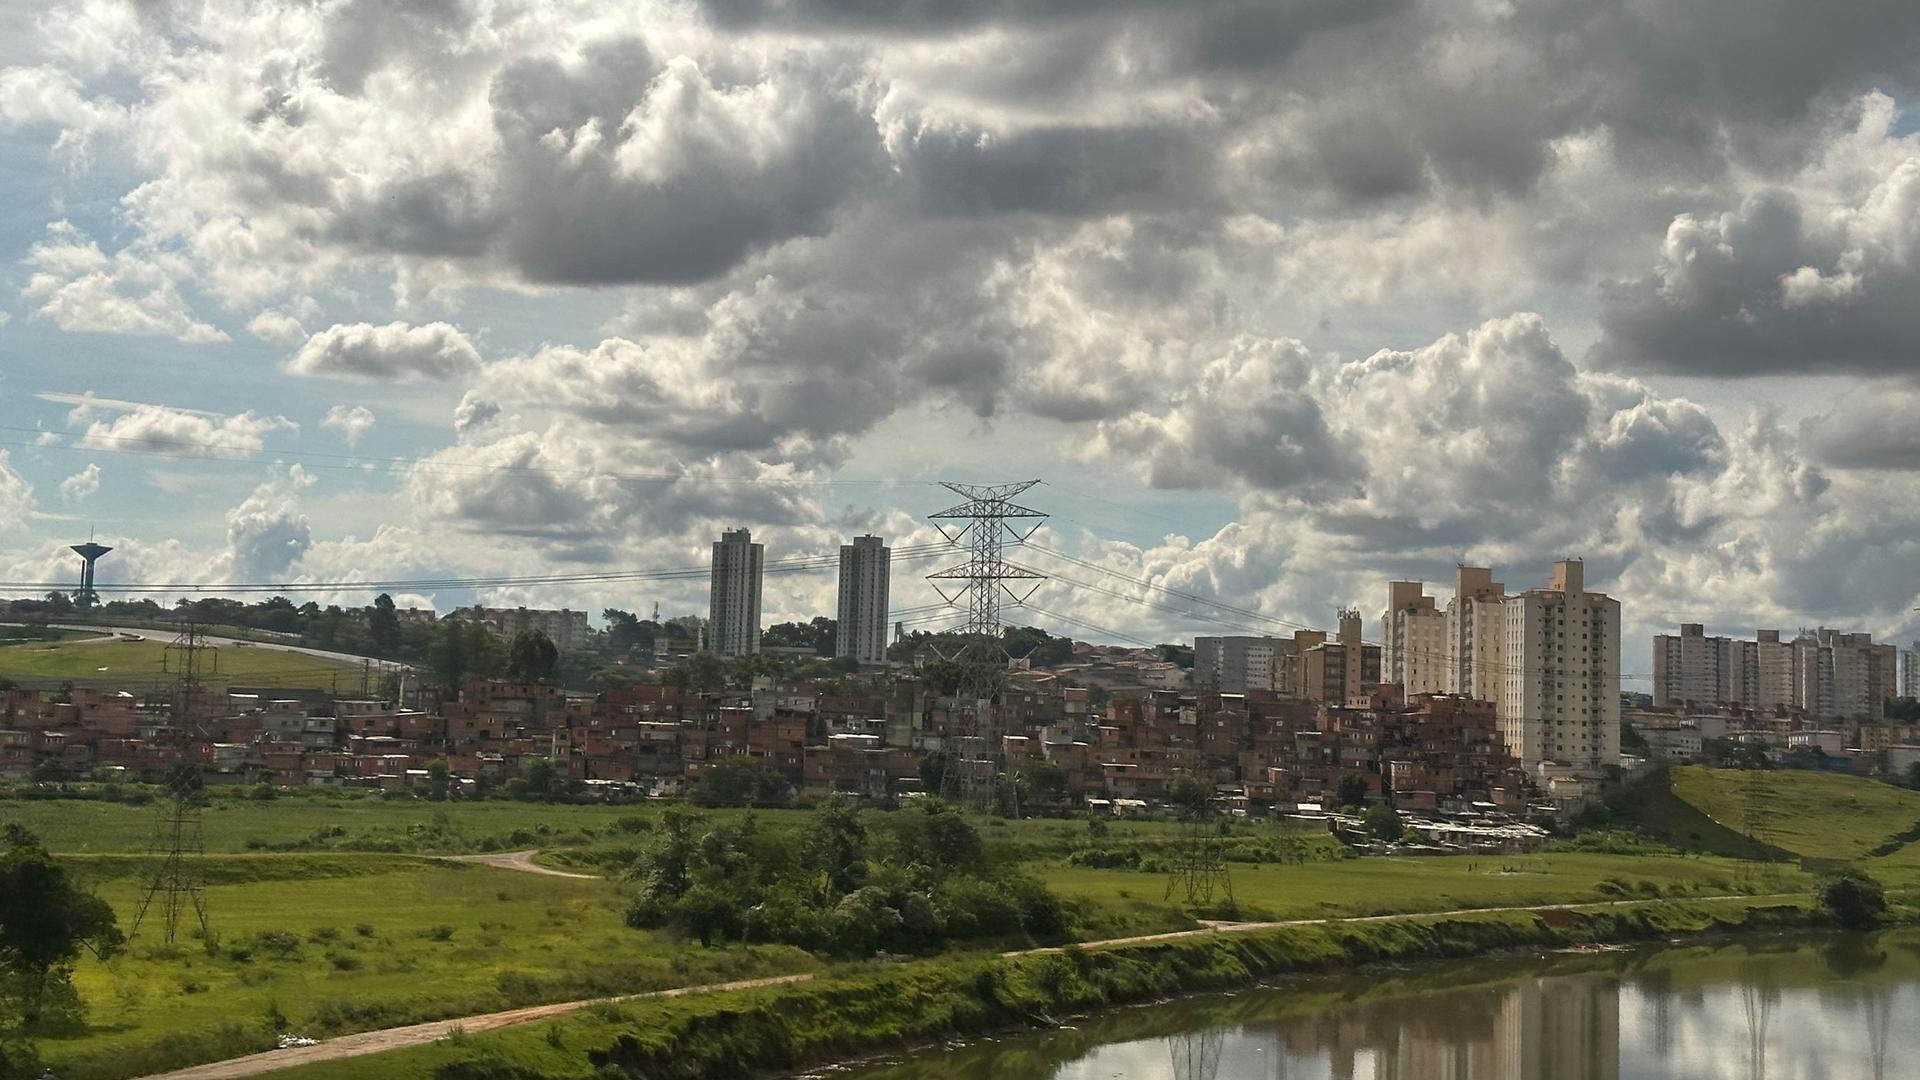 The view from the Emerald Line commuter rail, which follows the Pinheiros river and ends at Vila Natal, one of the enclaves of Venezuelan migrants in São Paulo.